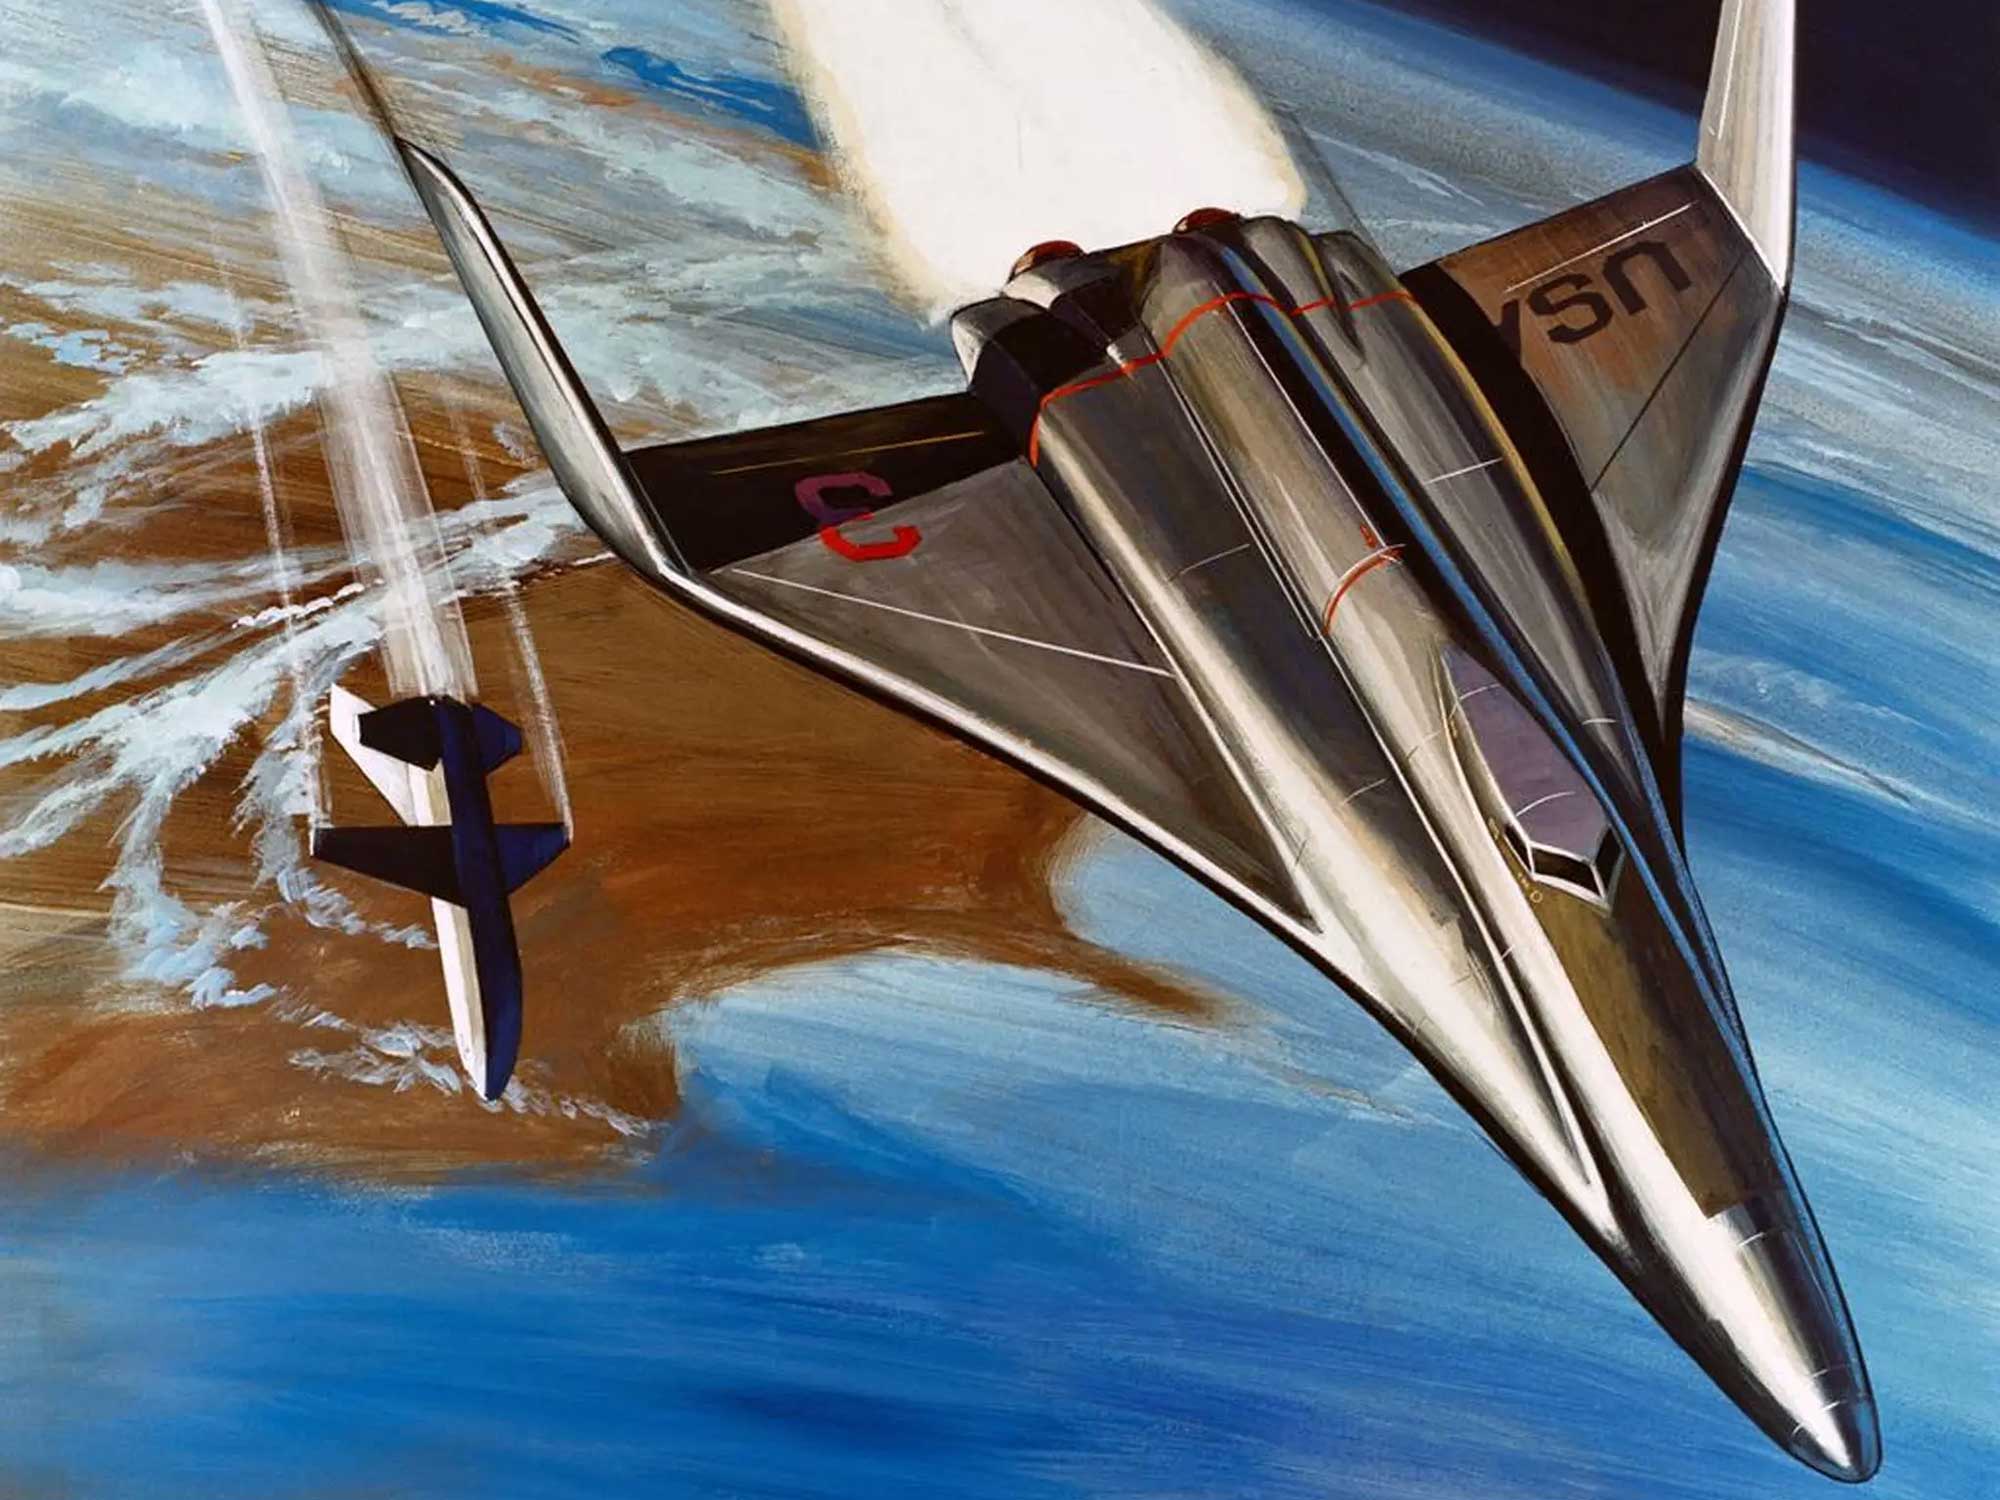 This Space Shuttle concept was too cool to be realized